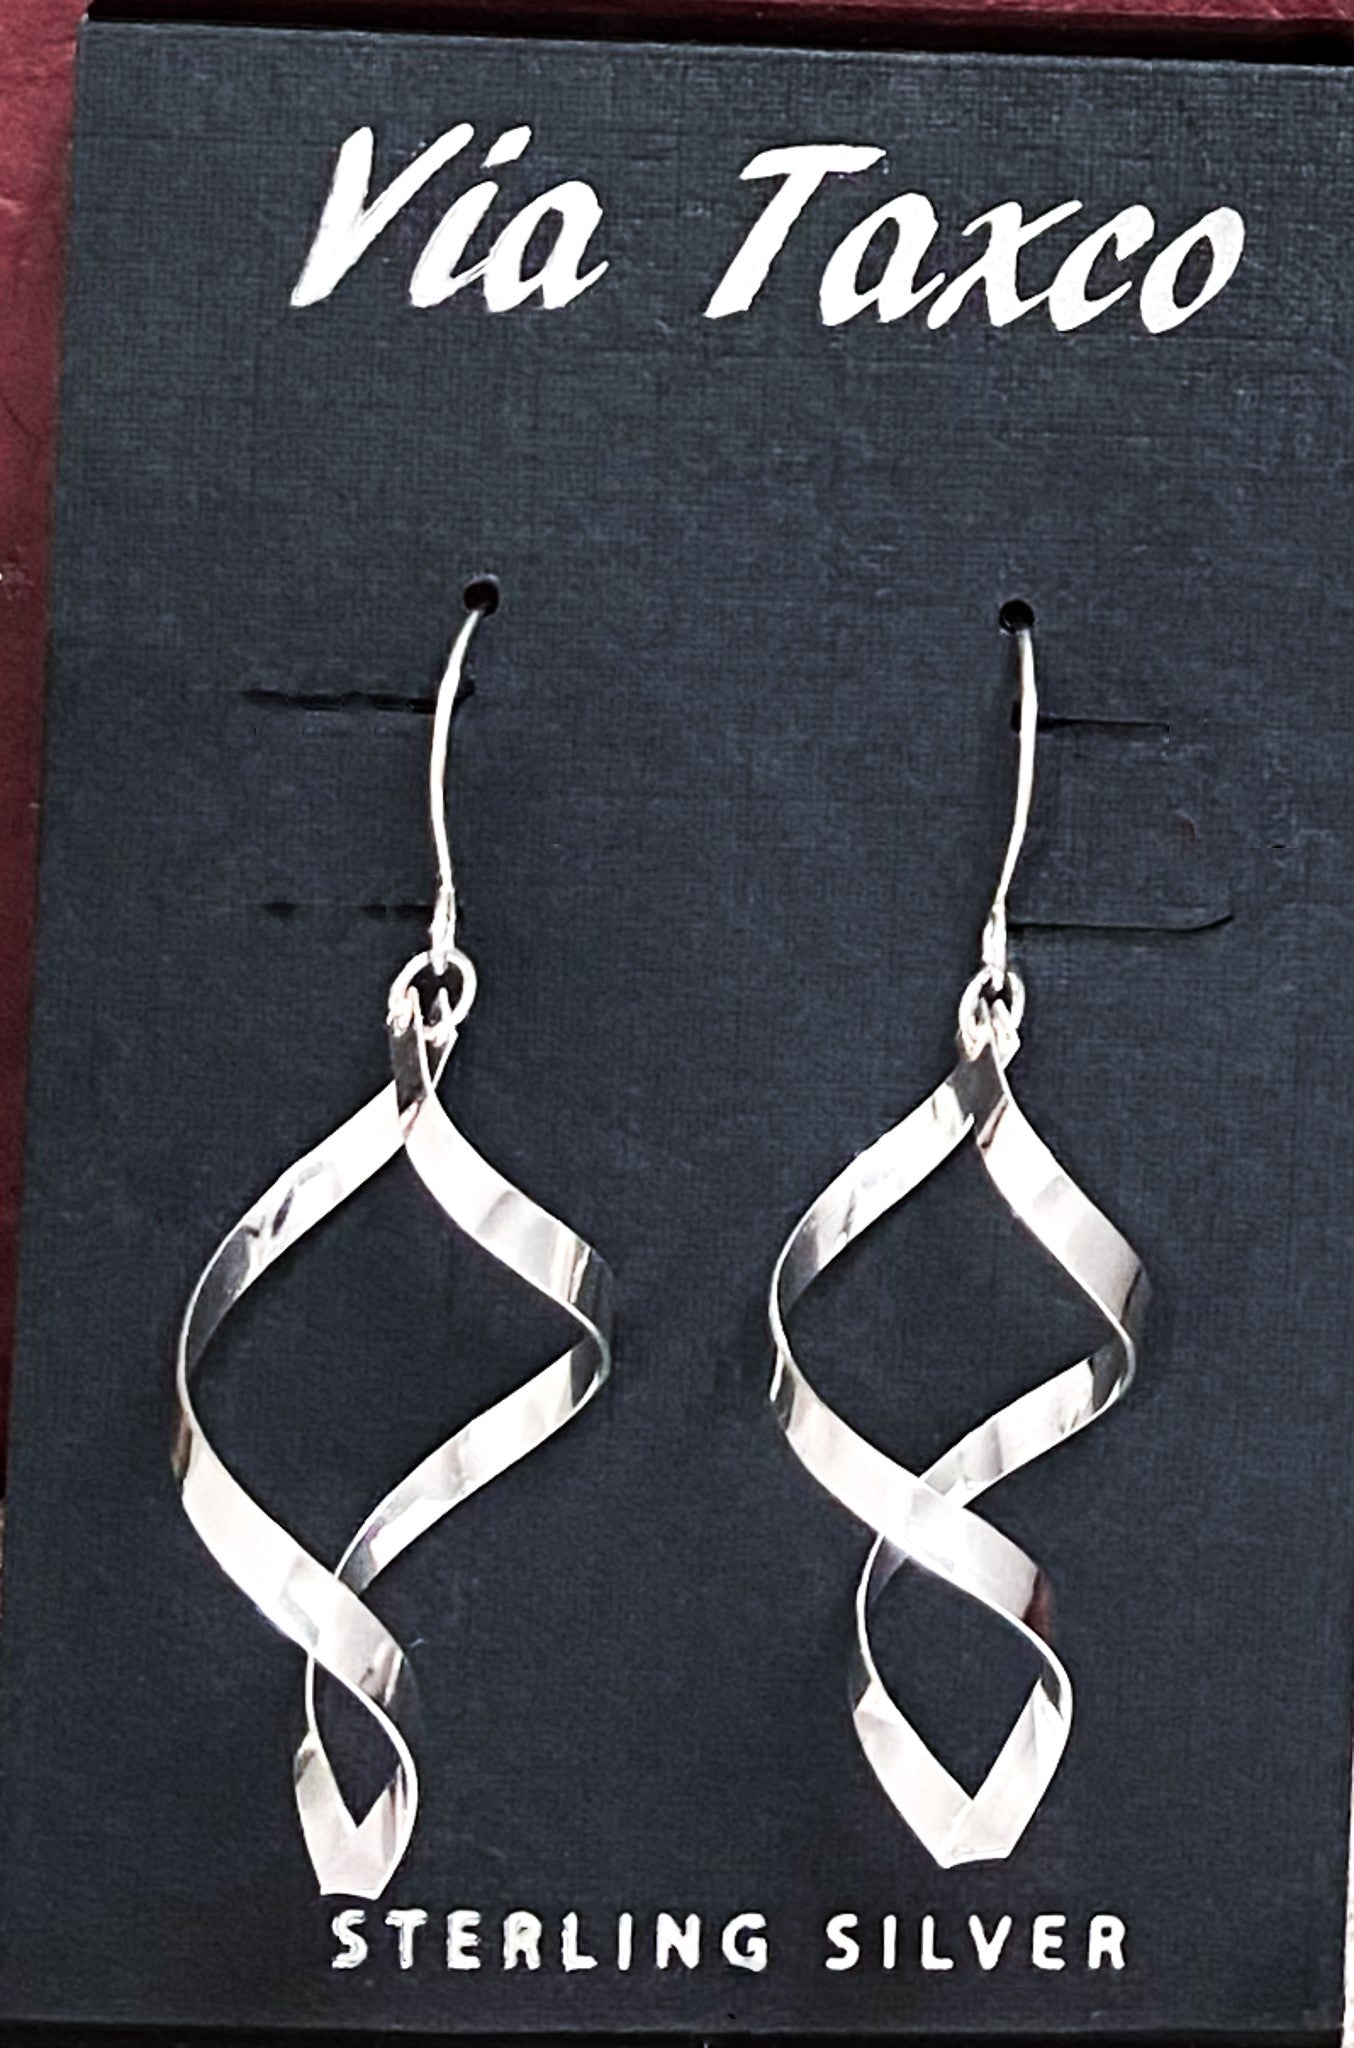 Sterling silver spiral earring. 1 3/4 inches long. Light and beautiful. Made in Taxco, Mexico. Urbansterlingsilver.com